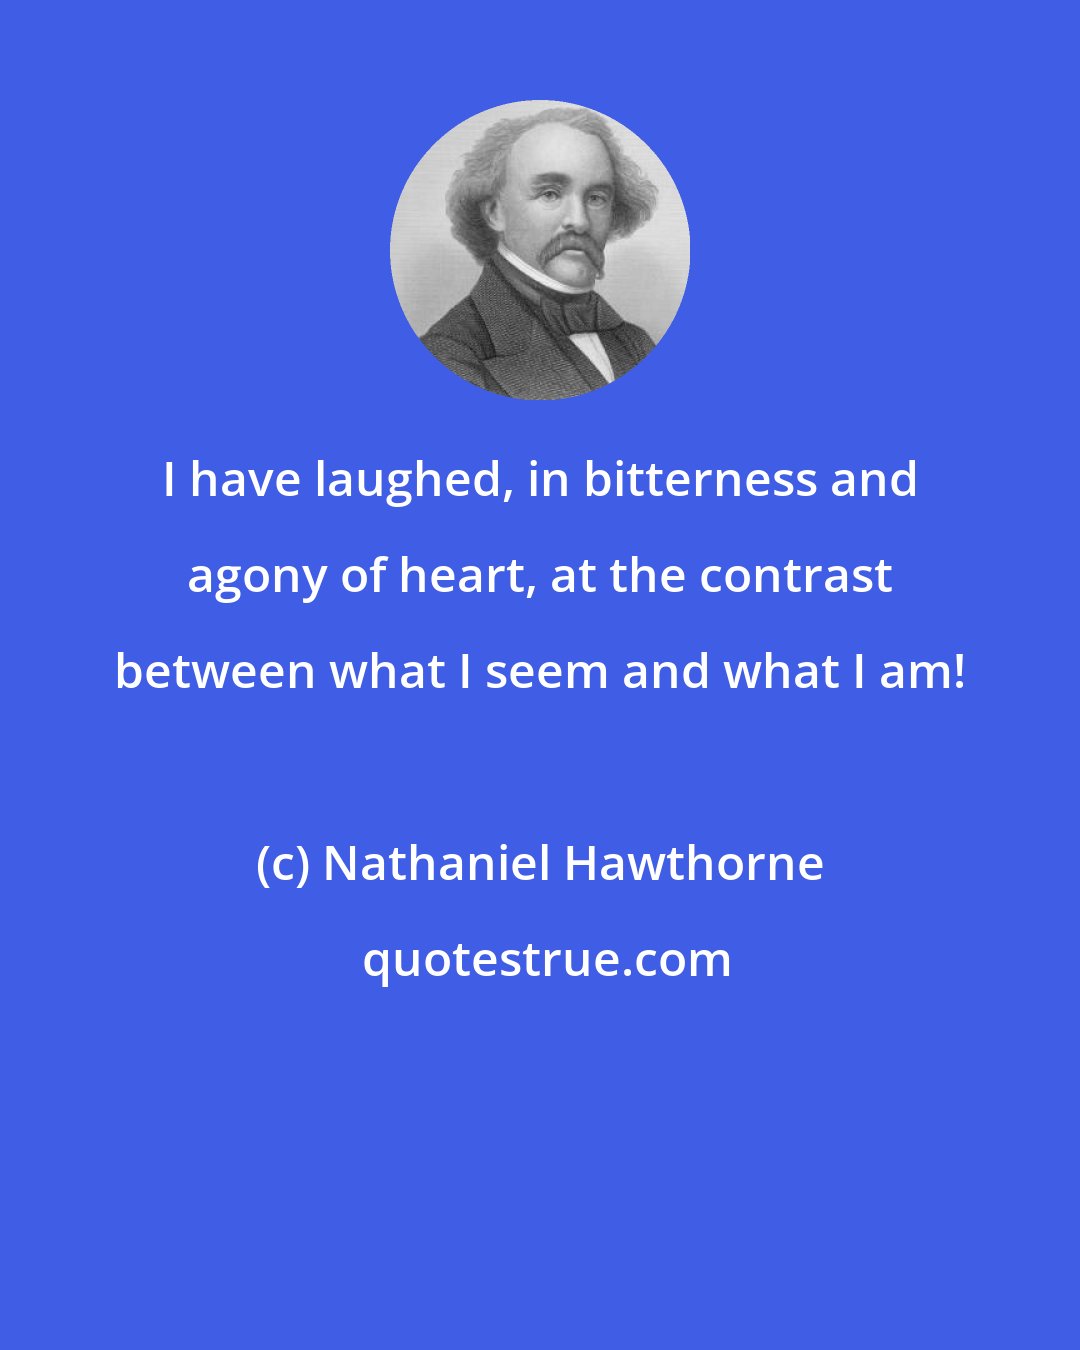 Nathaniel Hawthorne: I have laughed, in bitterness and agony of heart, at the contrast between what I seem and what I am!